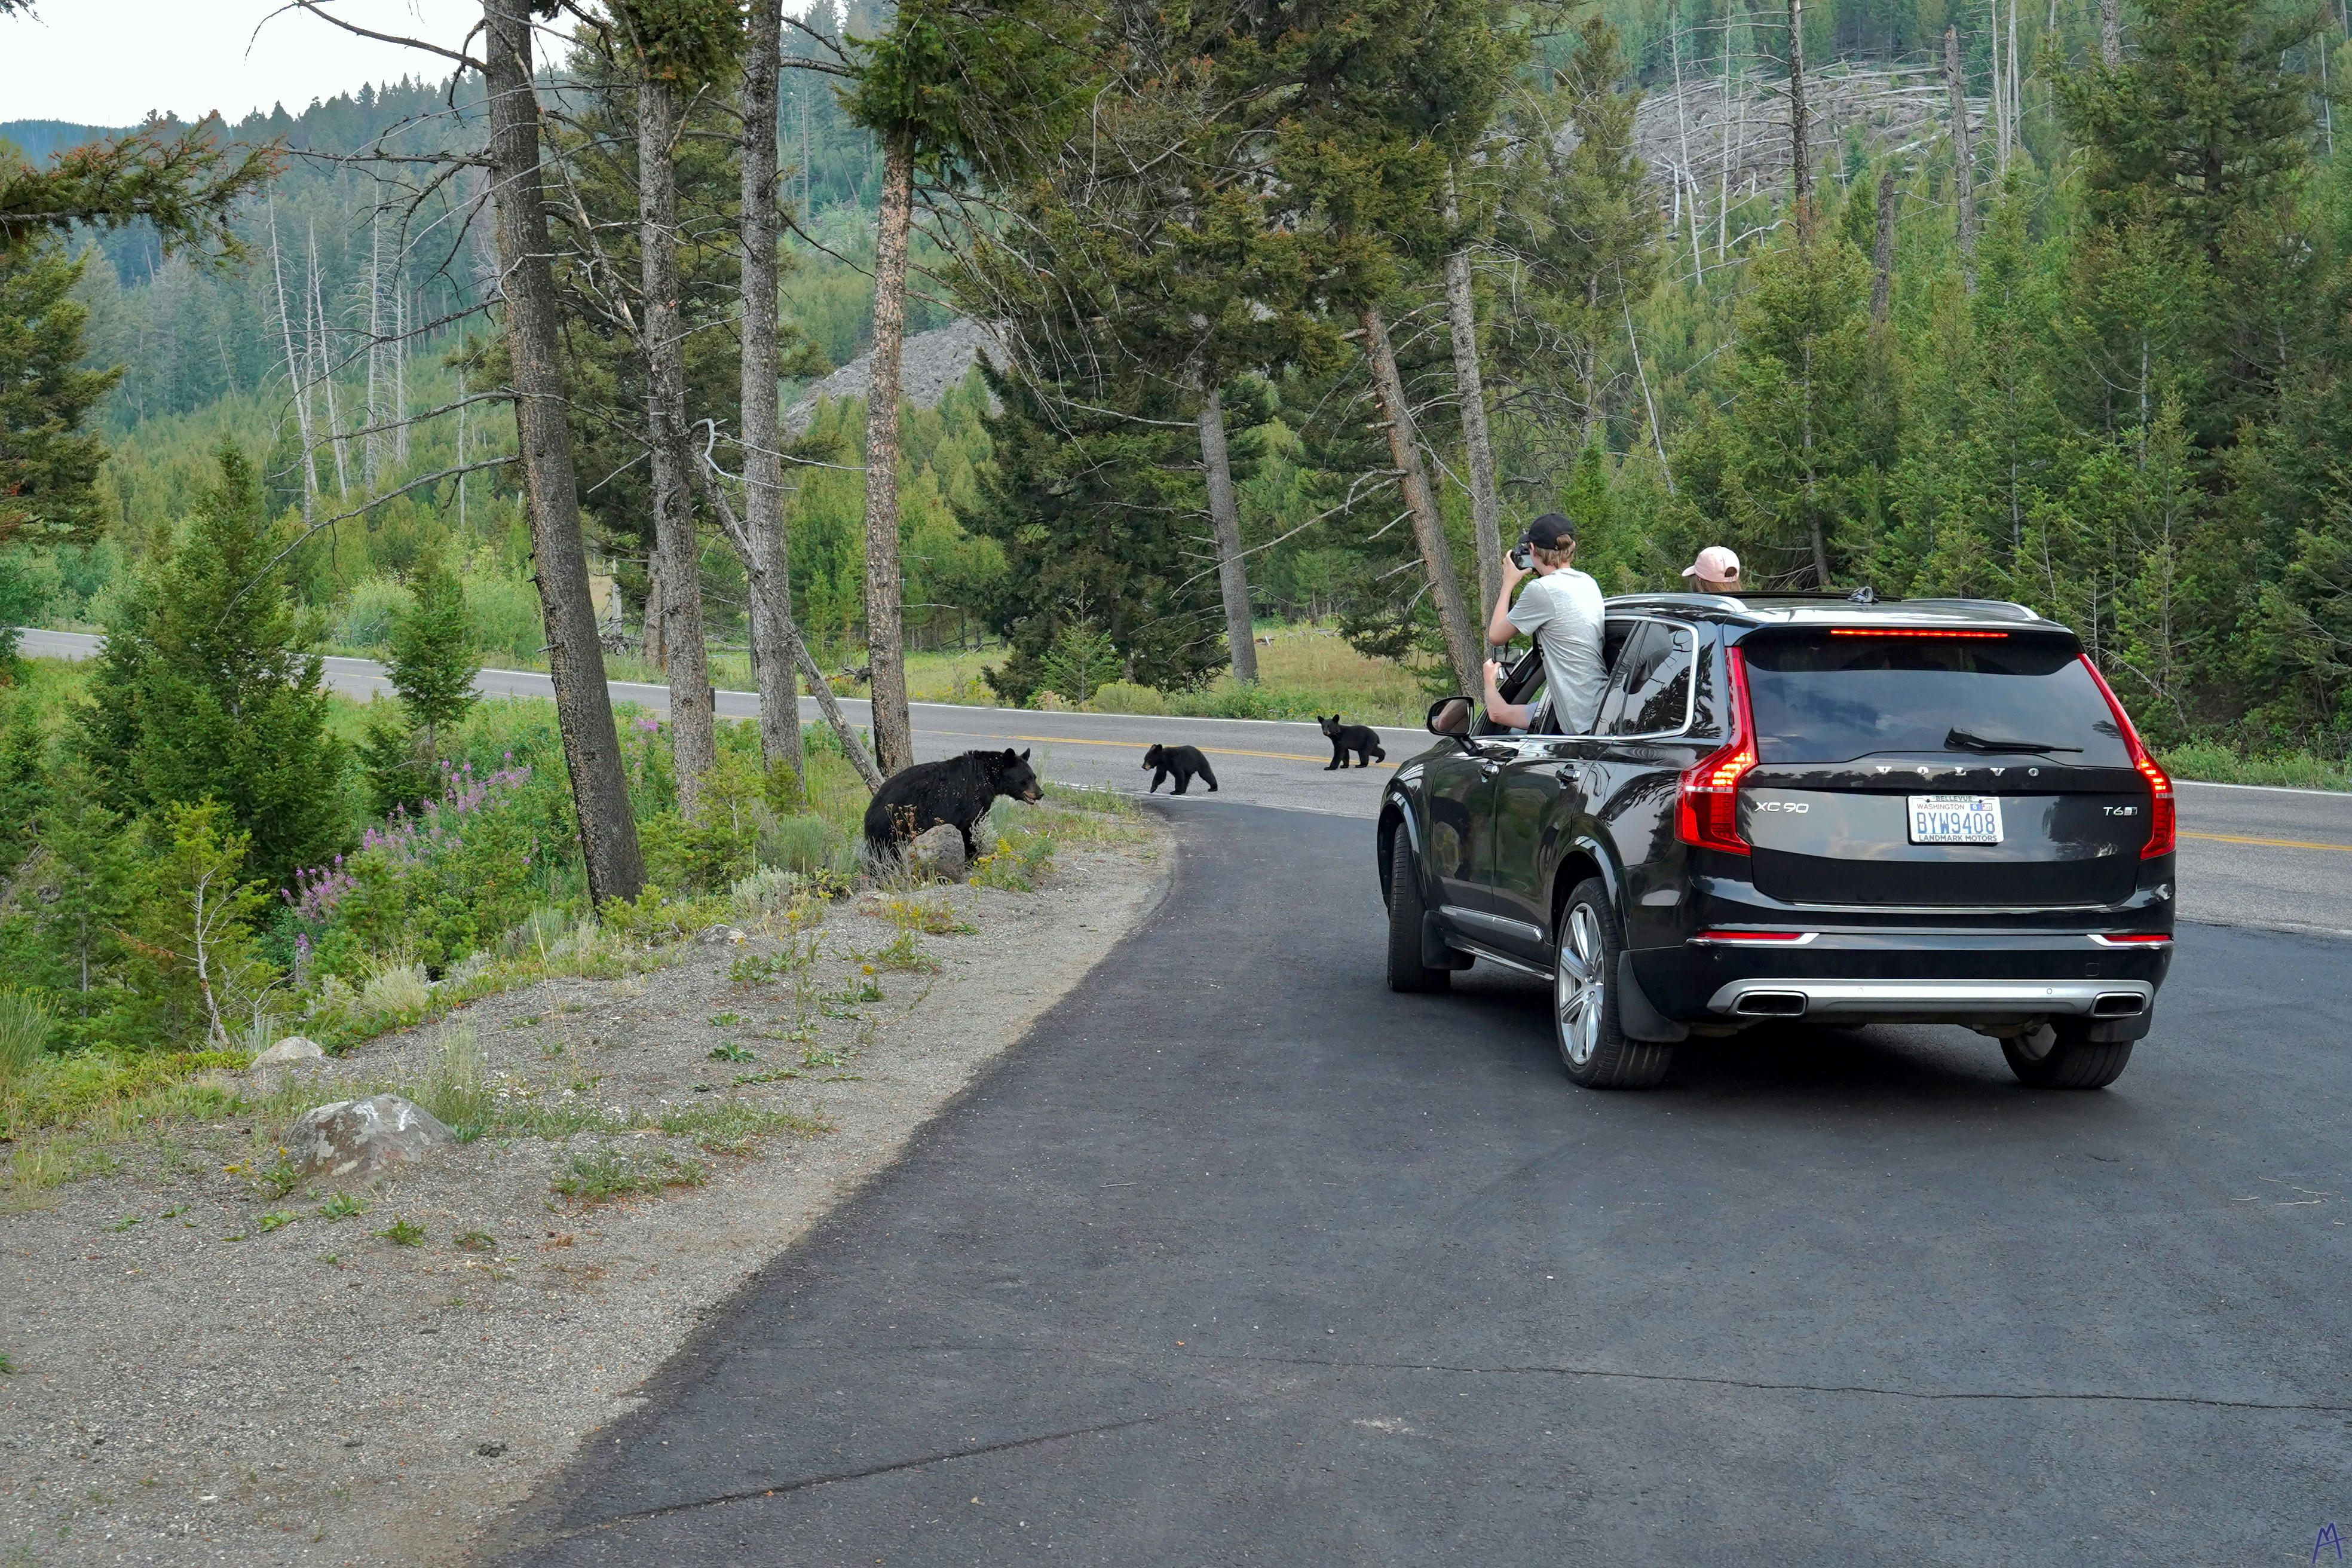 A mama black bear and two cubs walking on road near a parked car at Yellowstone